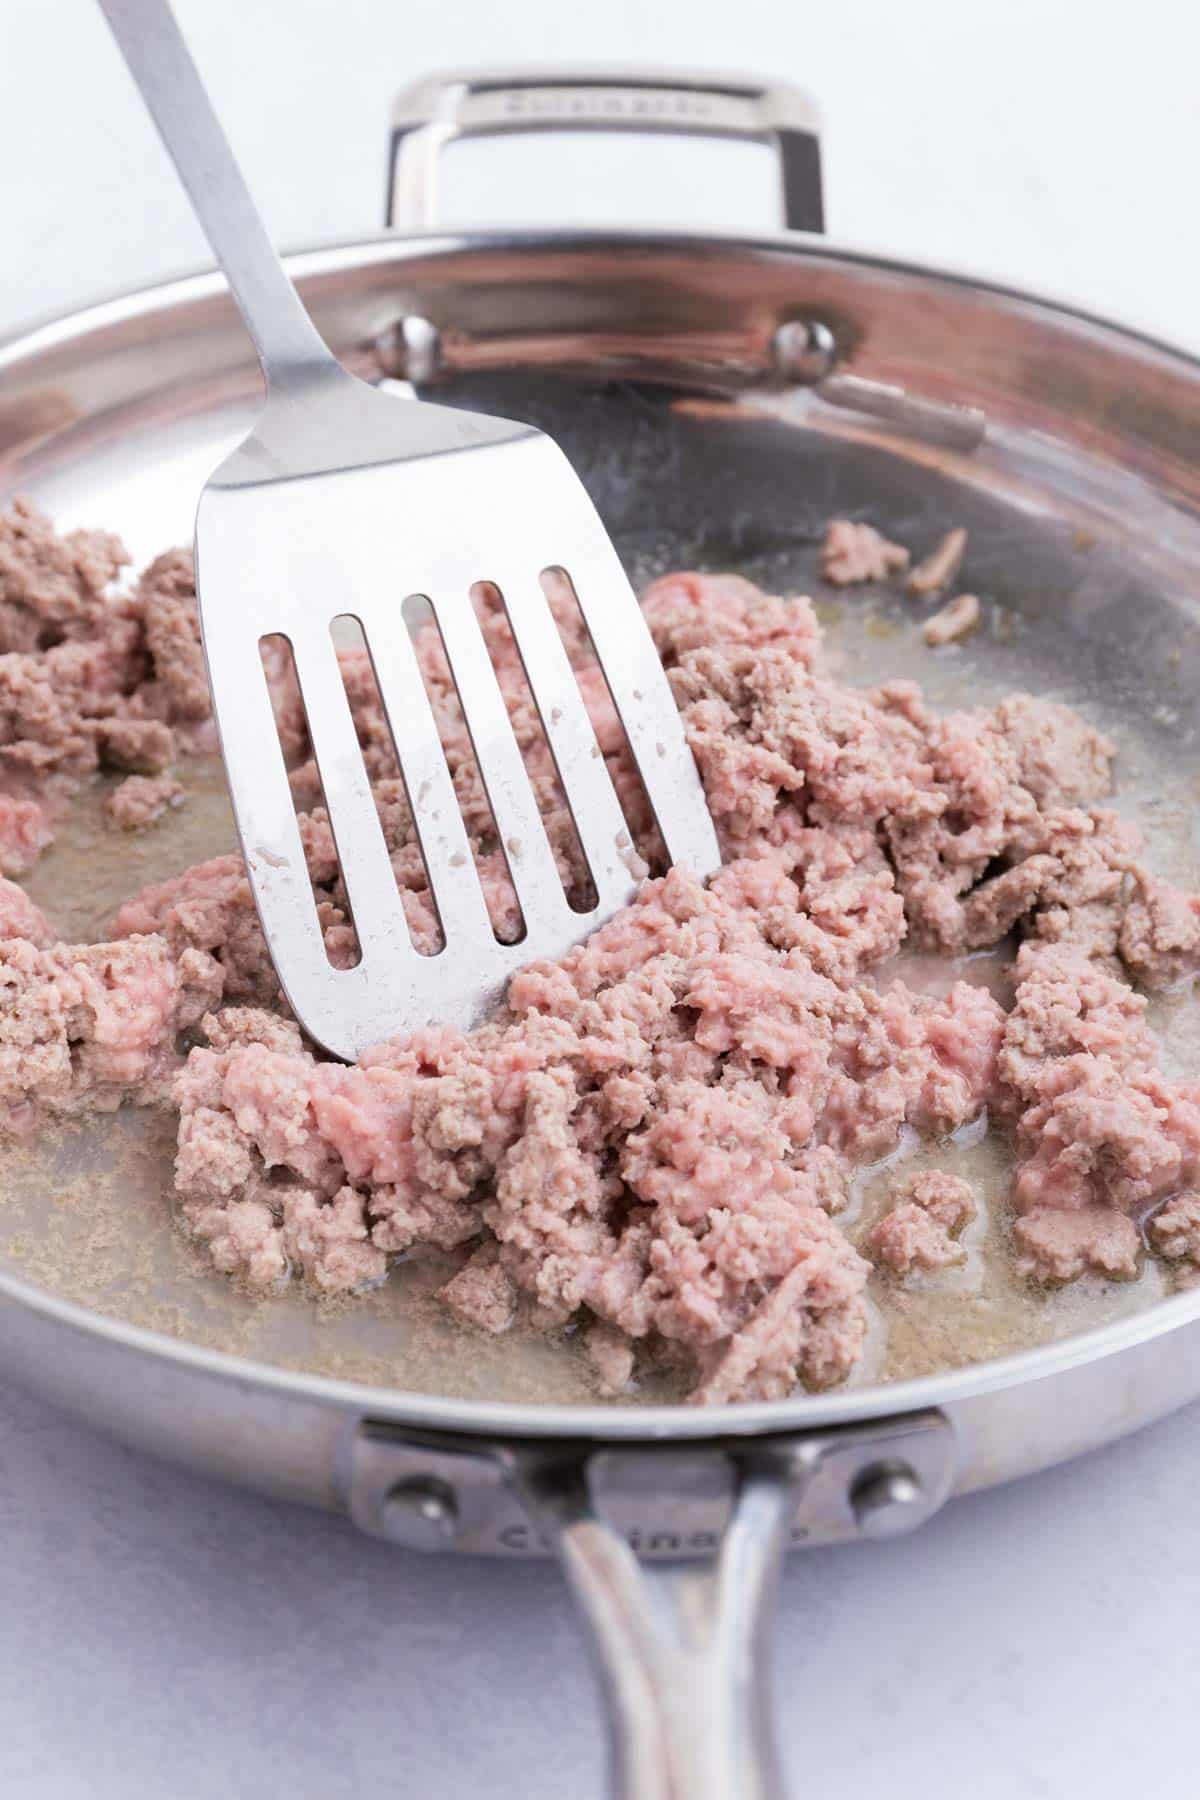 A spatula stirs ground turkey as it cooks in a skillet.